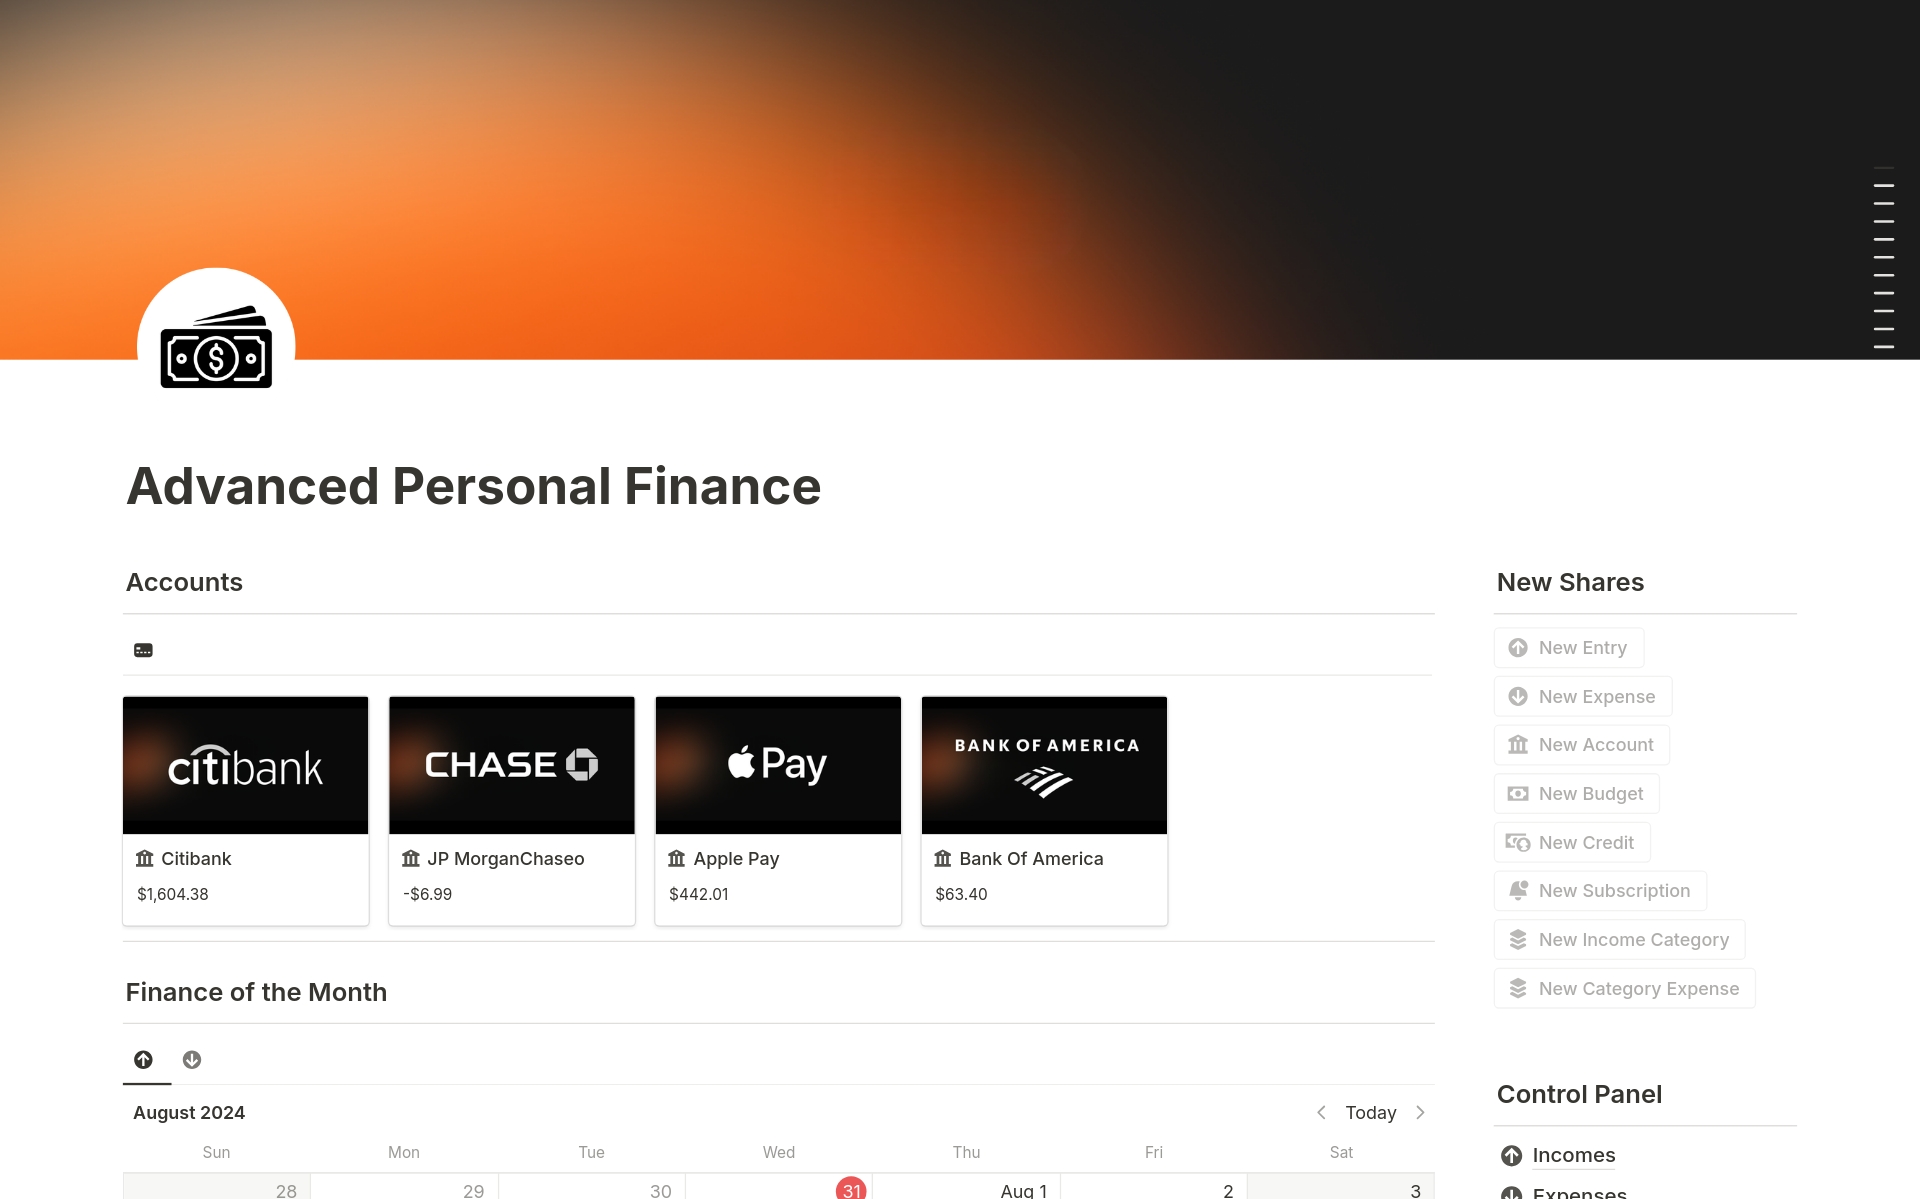 Manage your personal finances with greater precision using our Advanced Personal Finance template in Notion. Ideal for those seeking detailed control.